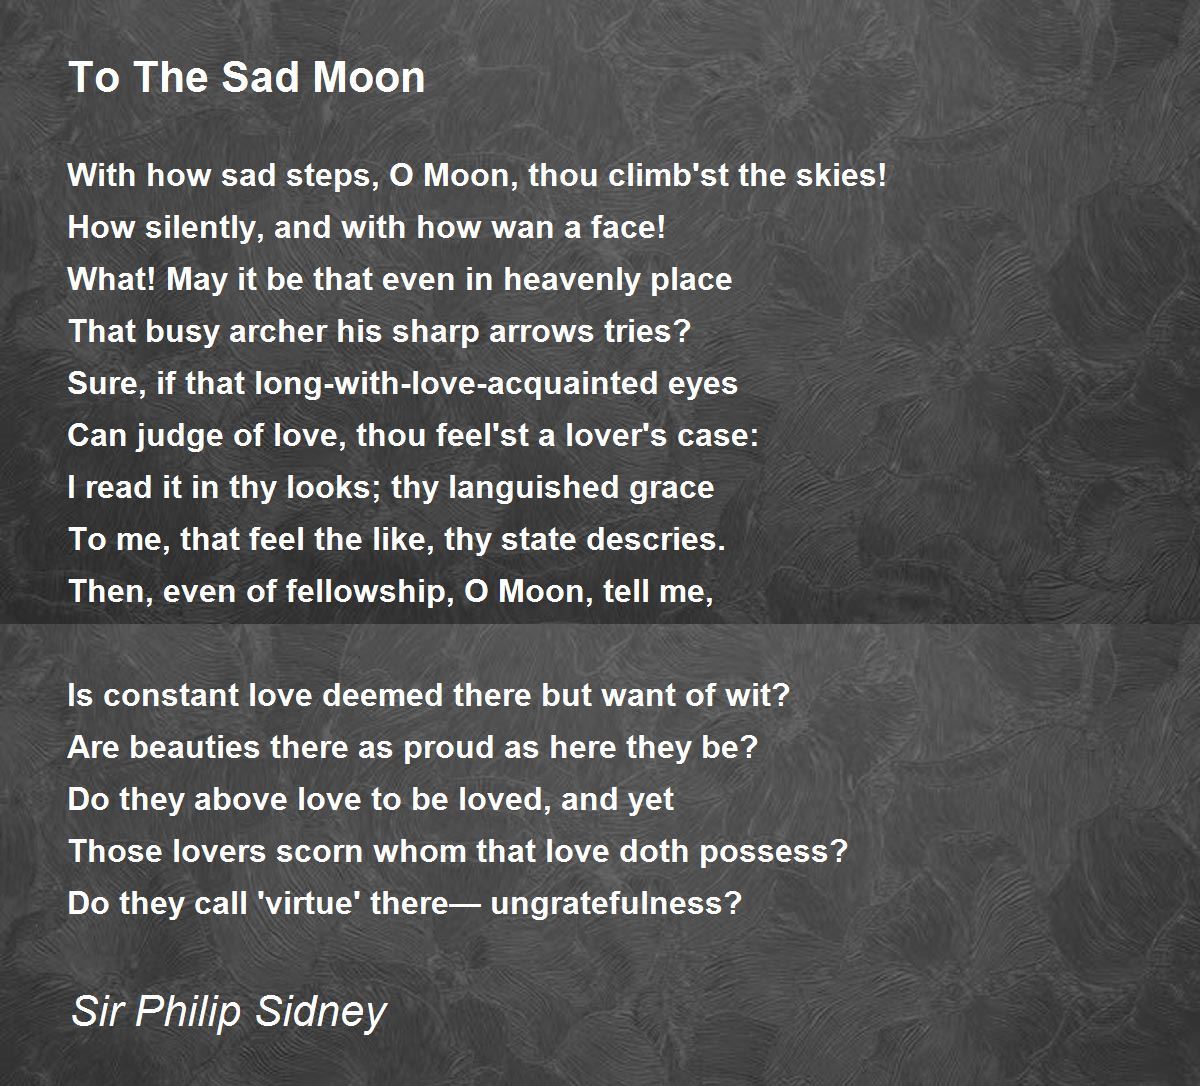 To The Sad Moon - To The Sad Moon Poem by Sir Philip Sidney